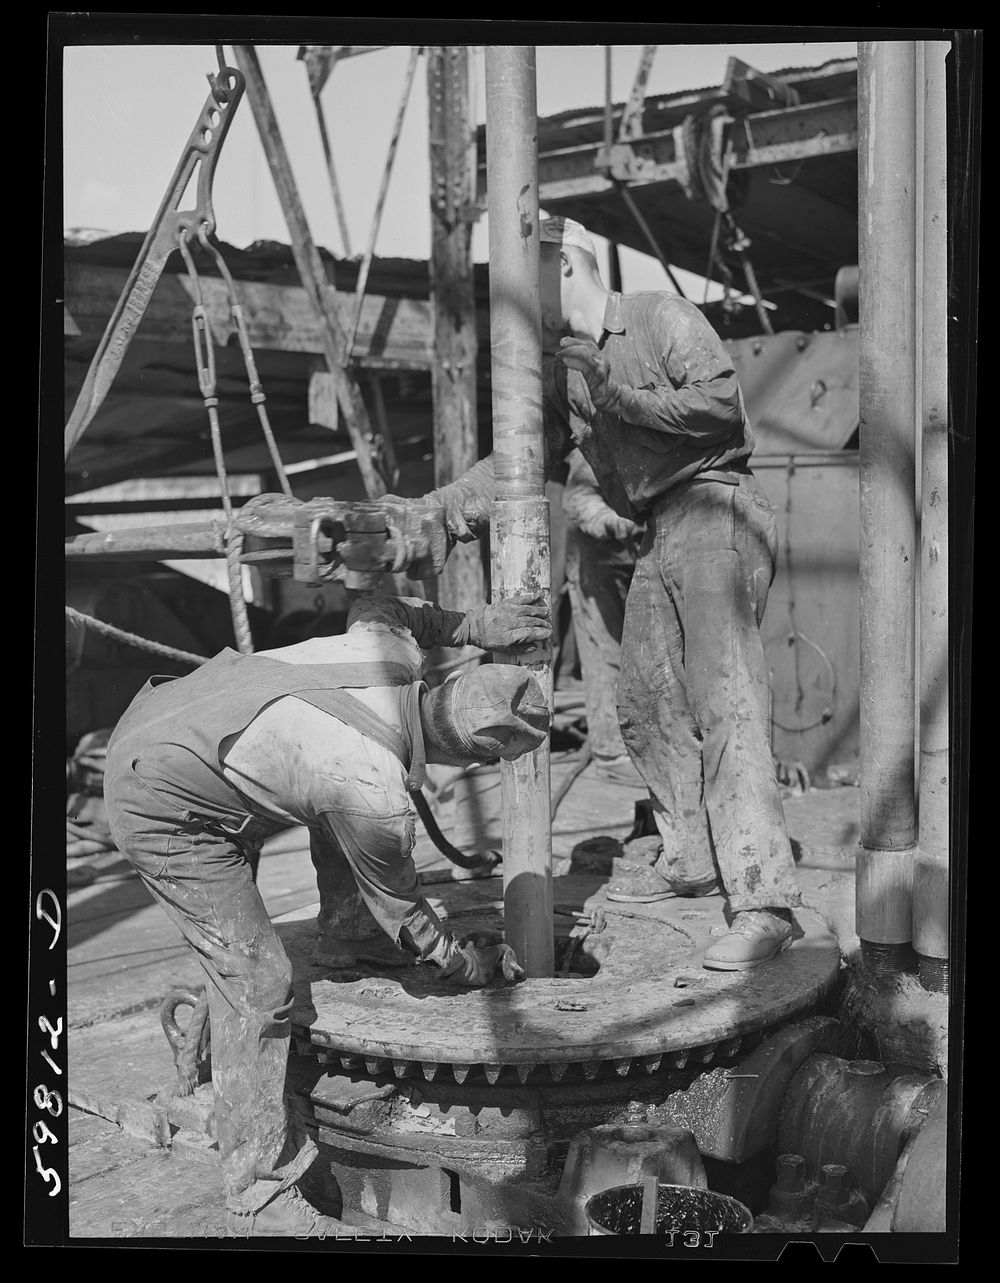 [Untitled photo, possibly related to: Oil workers pulling up old pipe to change bit on drilling pipe at bottom of oil well…